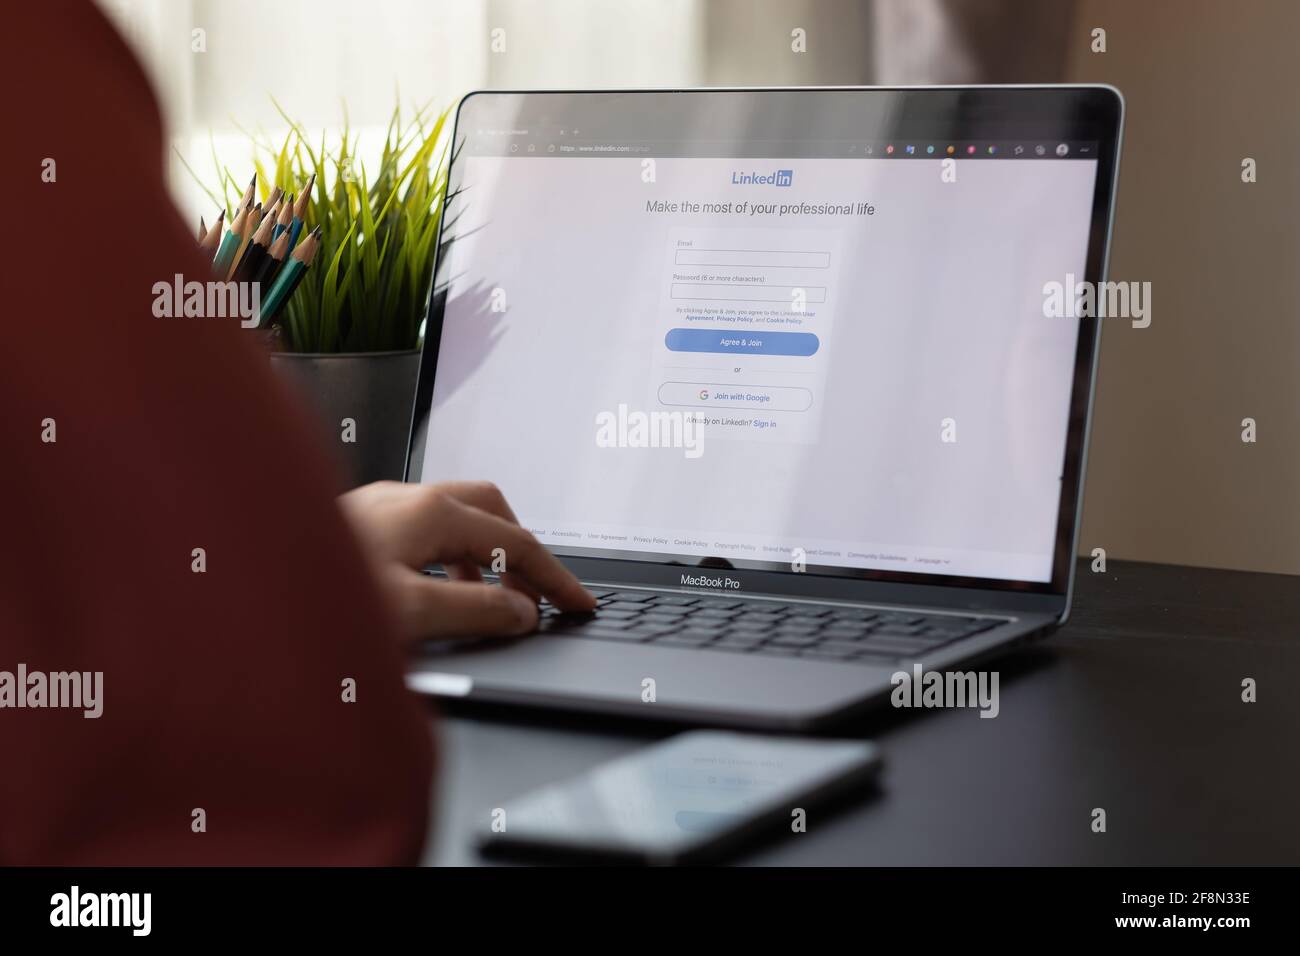 CHIANG MAI, THAILAND, APR 10, 2021 : A woman using macbook pro with LinkedIn on the screen.LinkedIn is a photo-sharing web Stock Photo